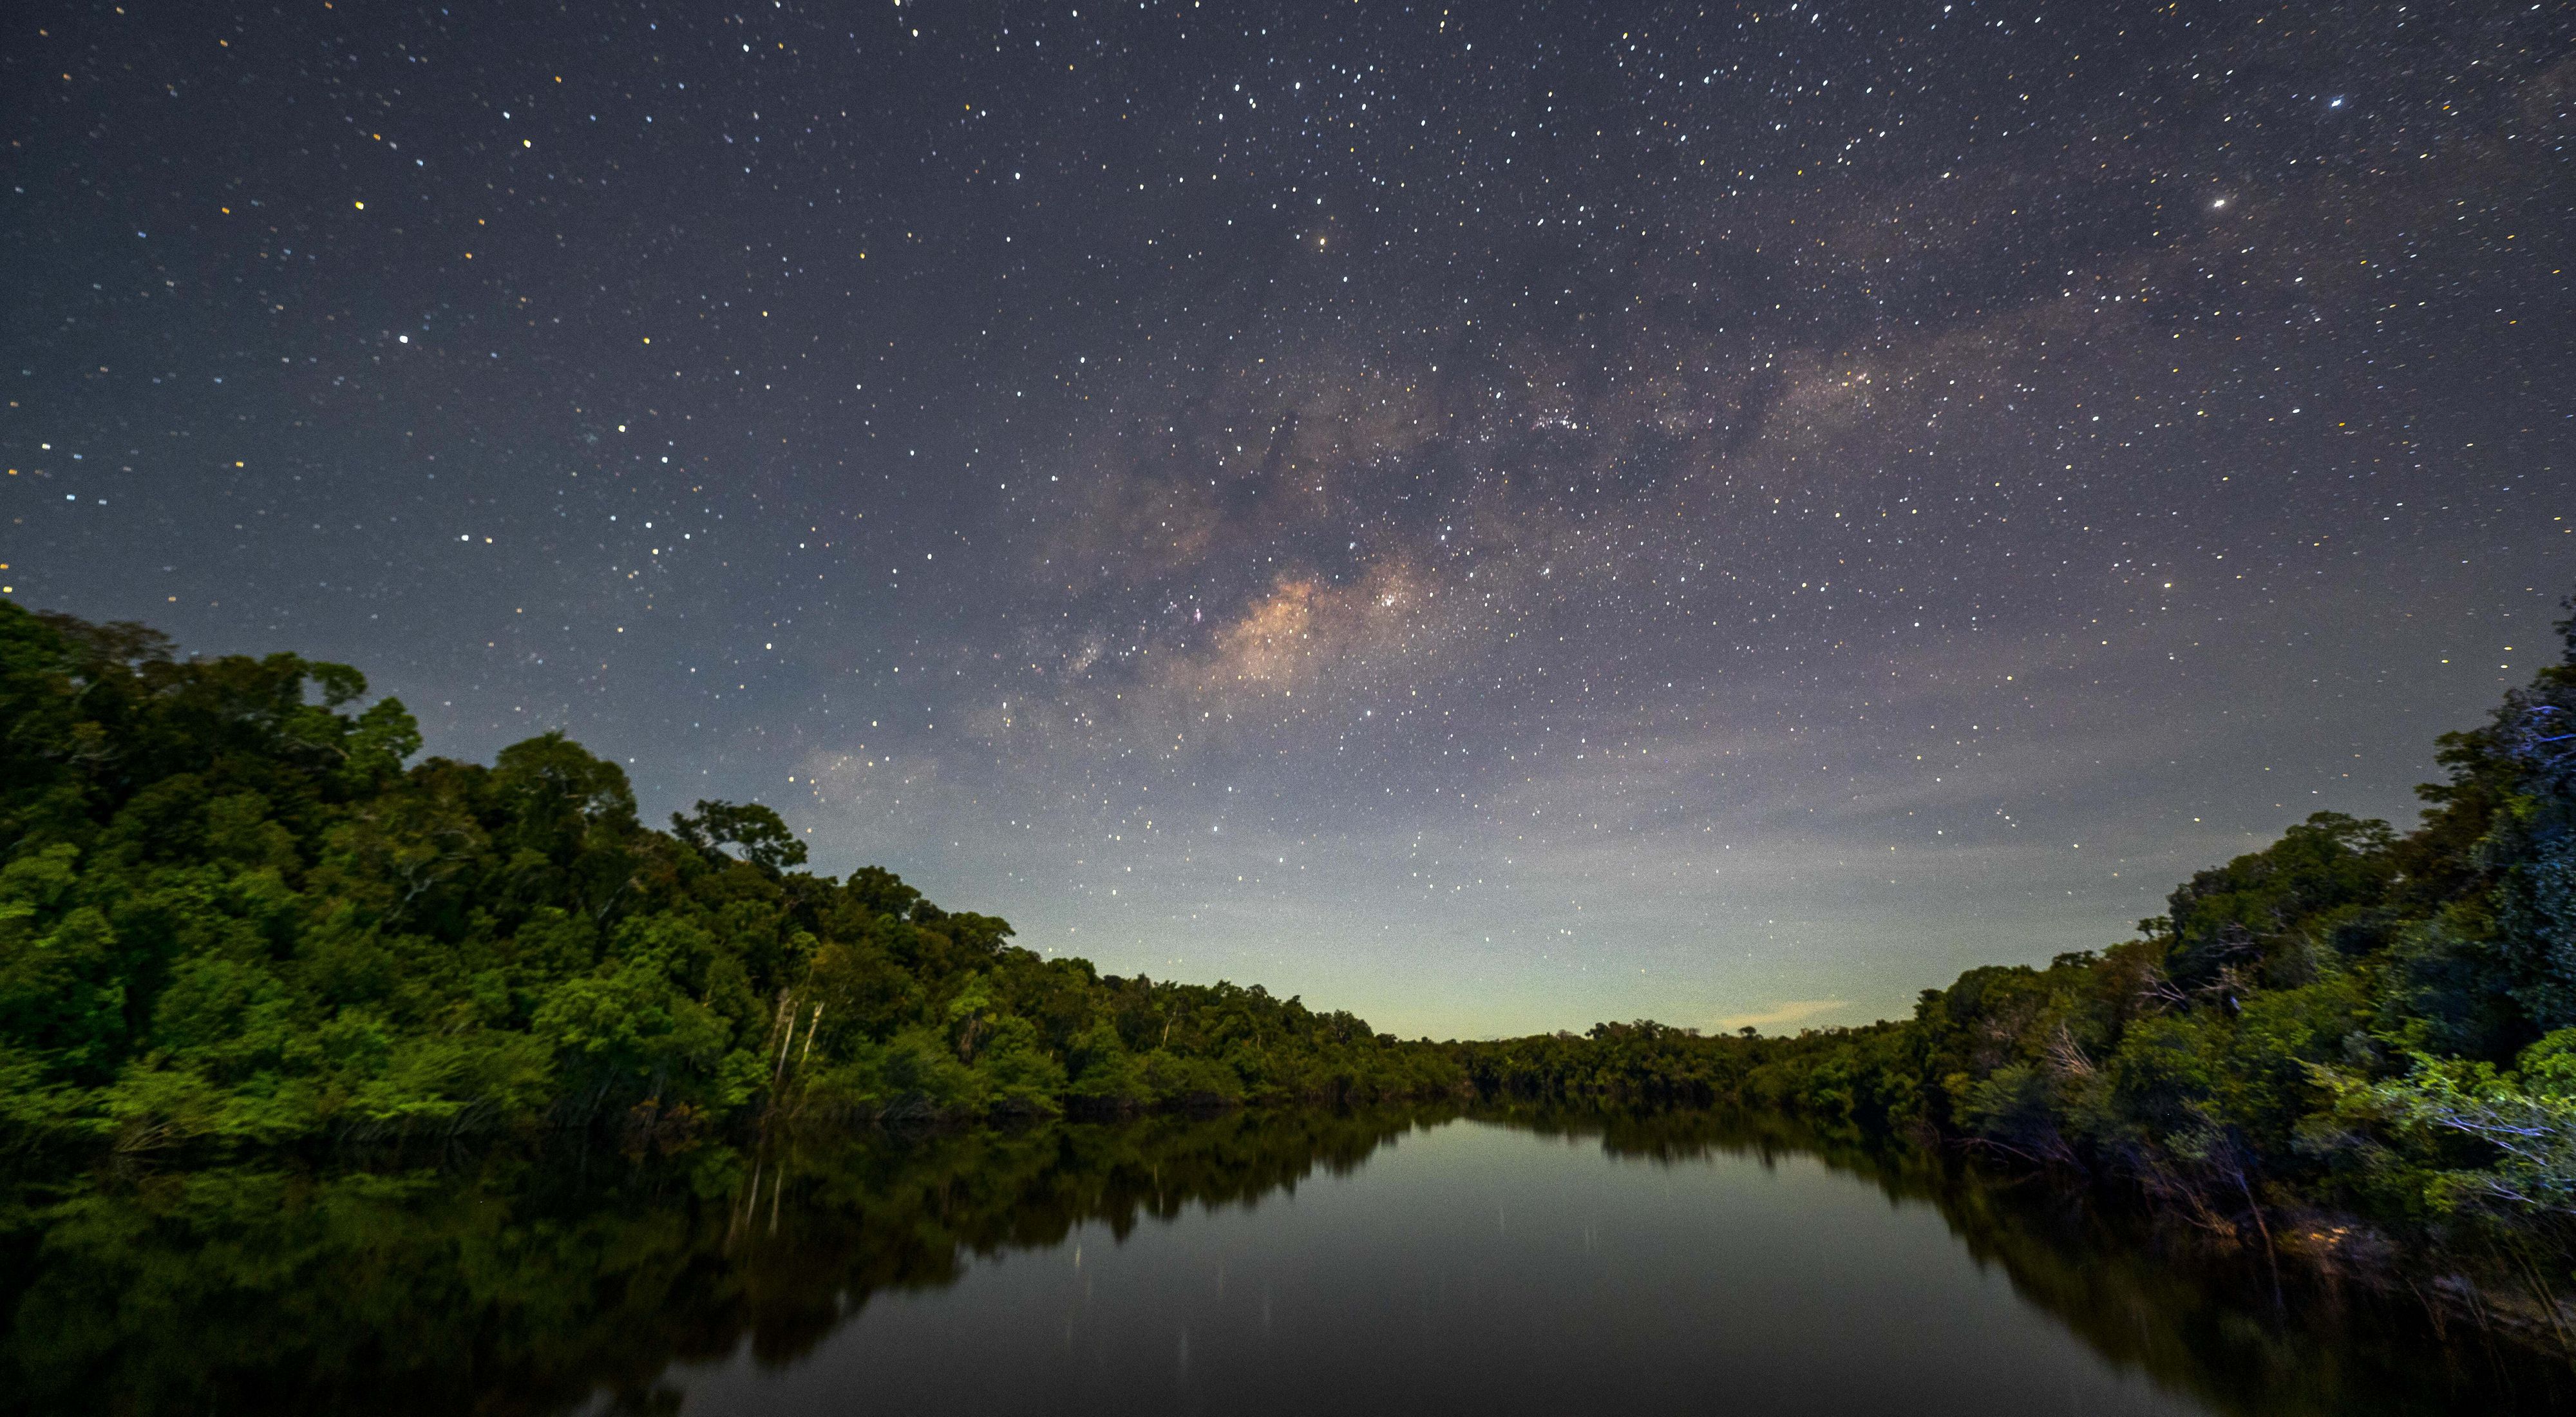 Clusters of stars and the milky way galaxy appear in a darkening sky over tropical rainforest and a river